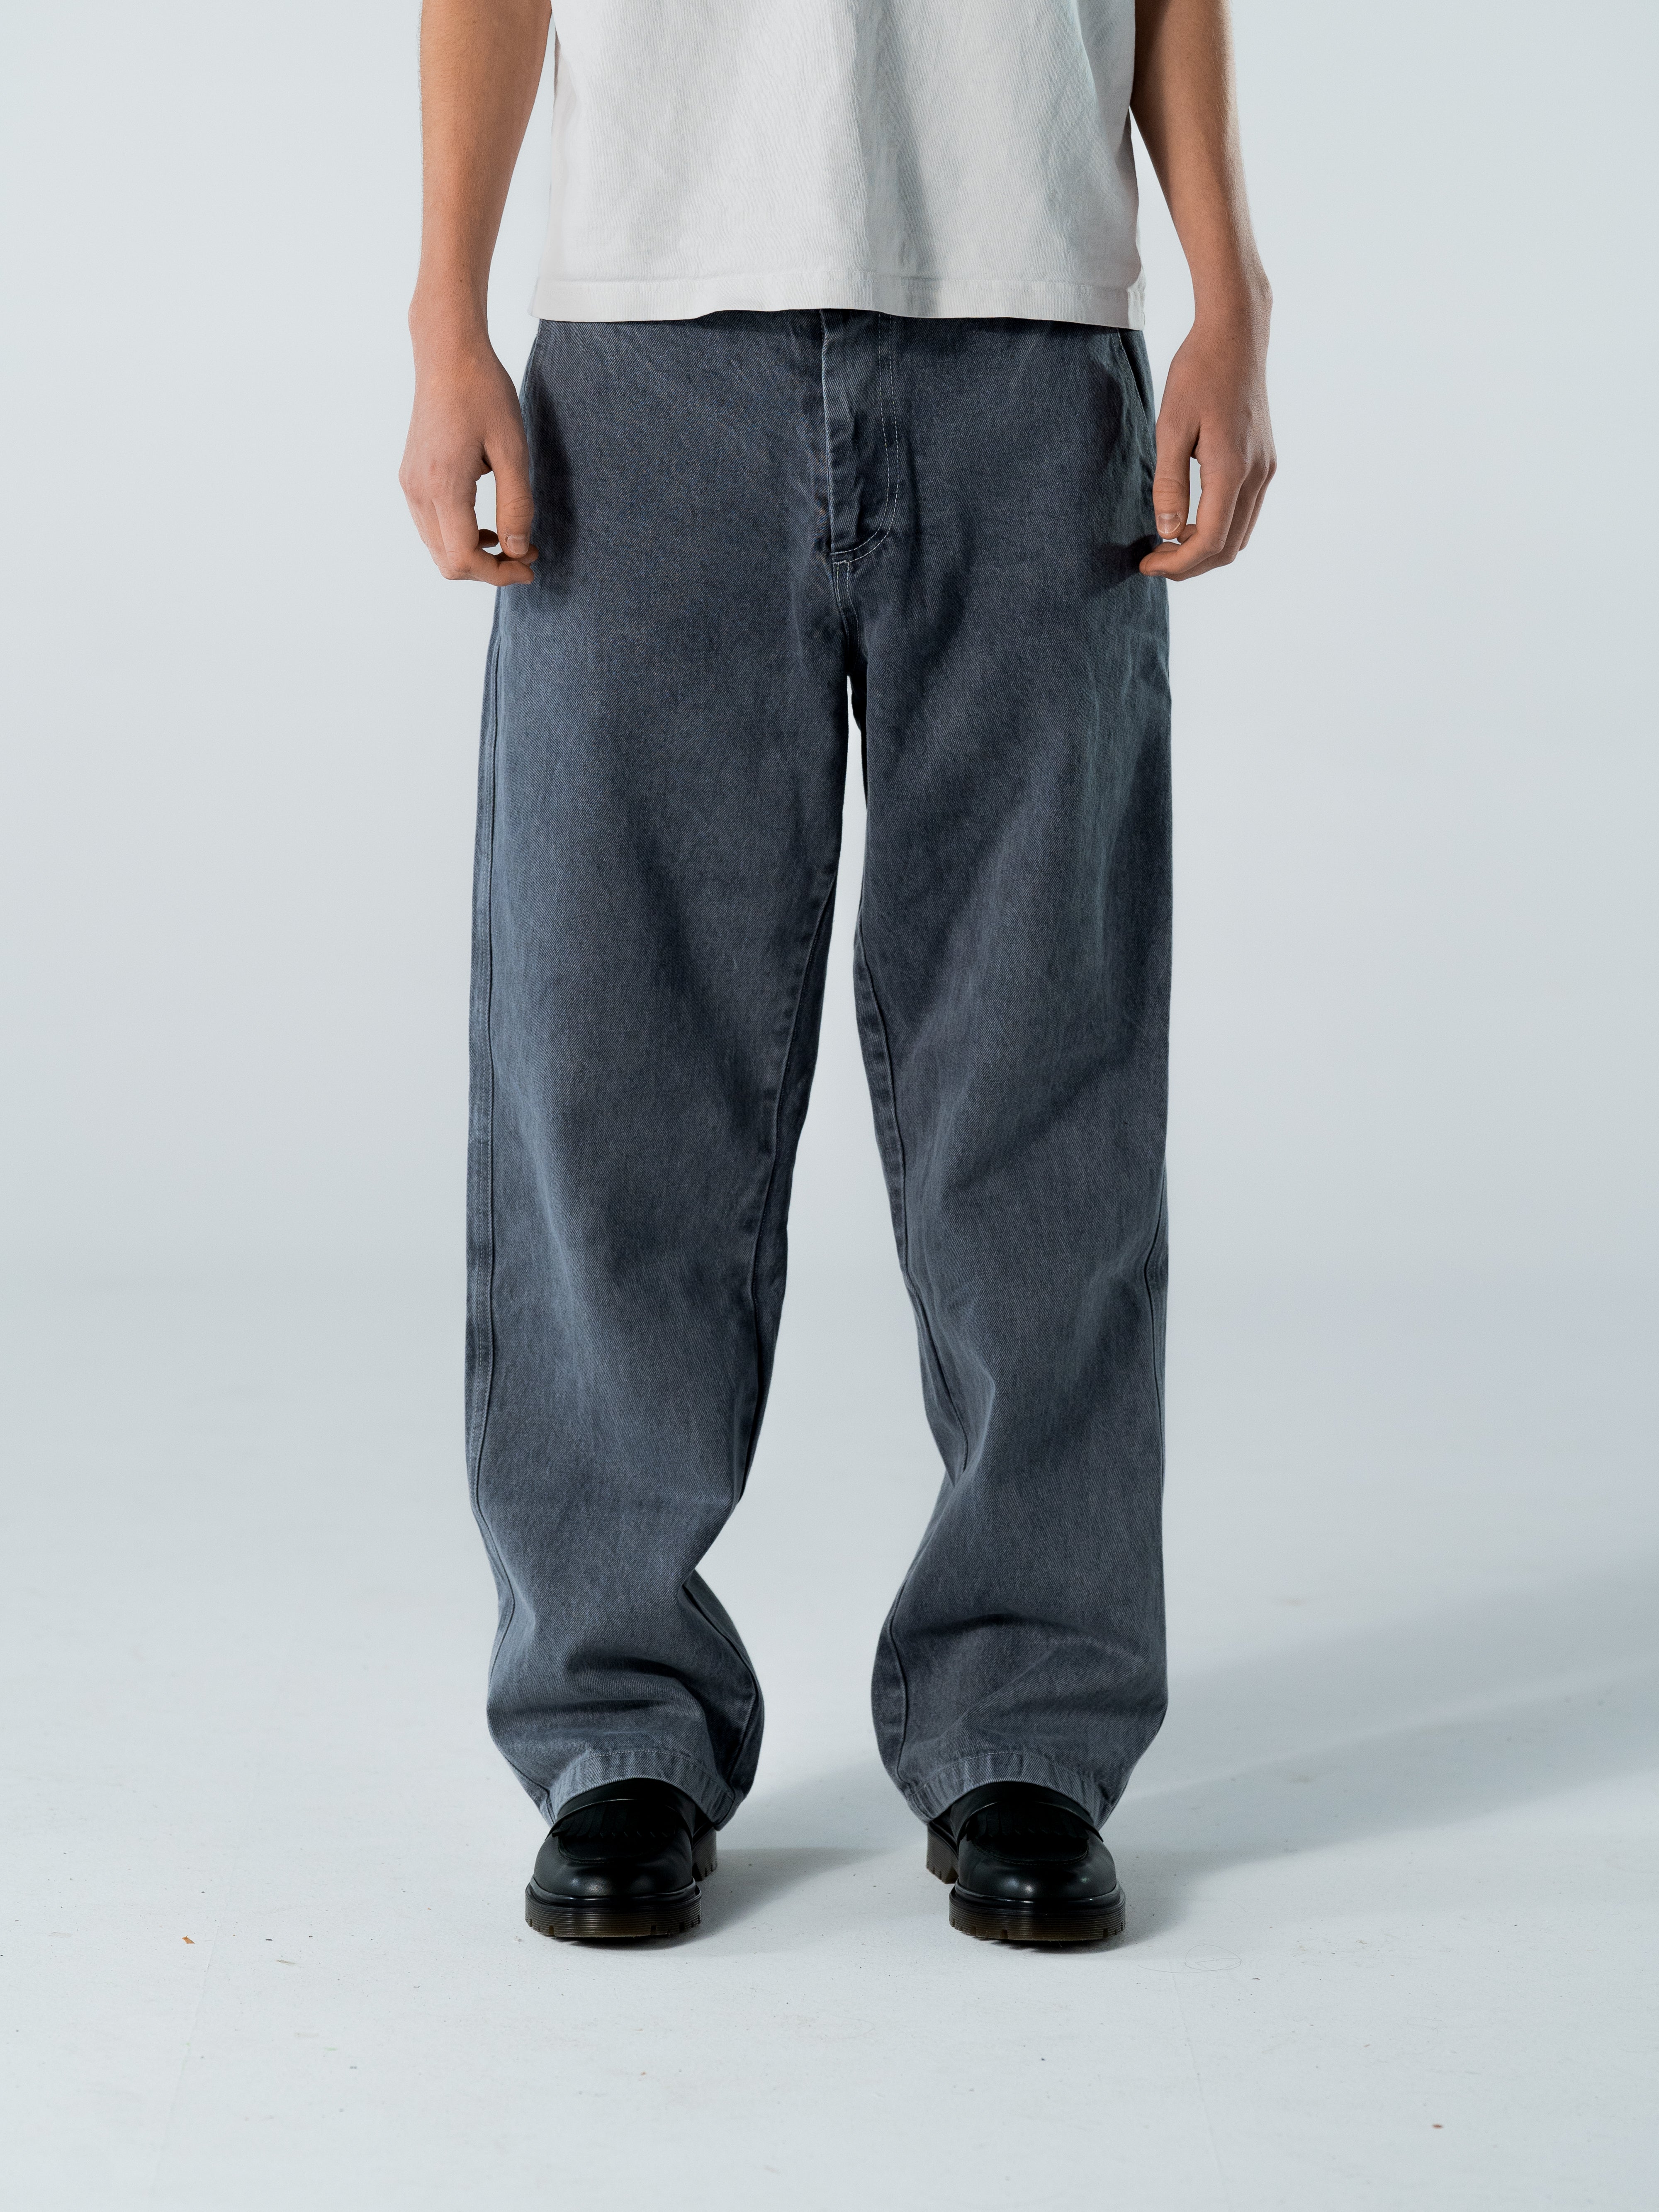 Grey Washed Baggy Jeans